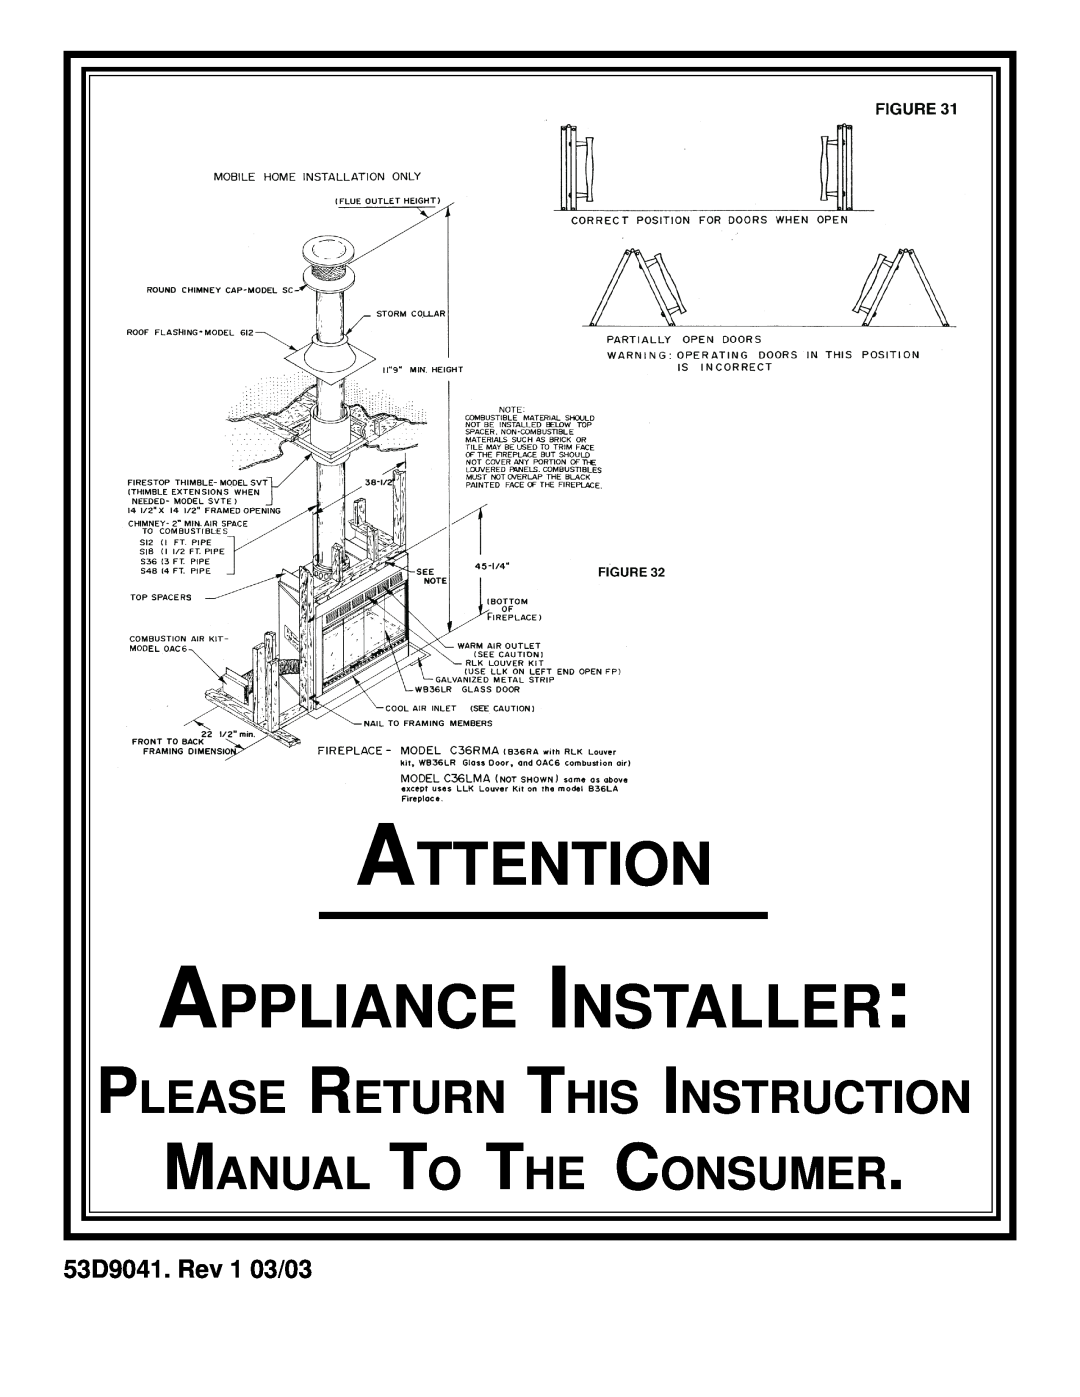 Martin Fireplaces B36RA 53D9041. Rev 1 03/03, Appliance Installer, Please Return This Instruction, Manual To The Consumer 